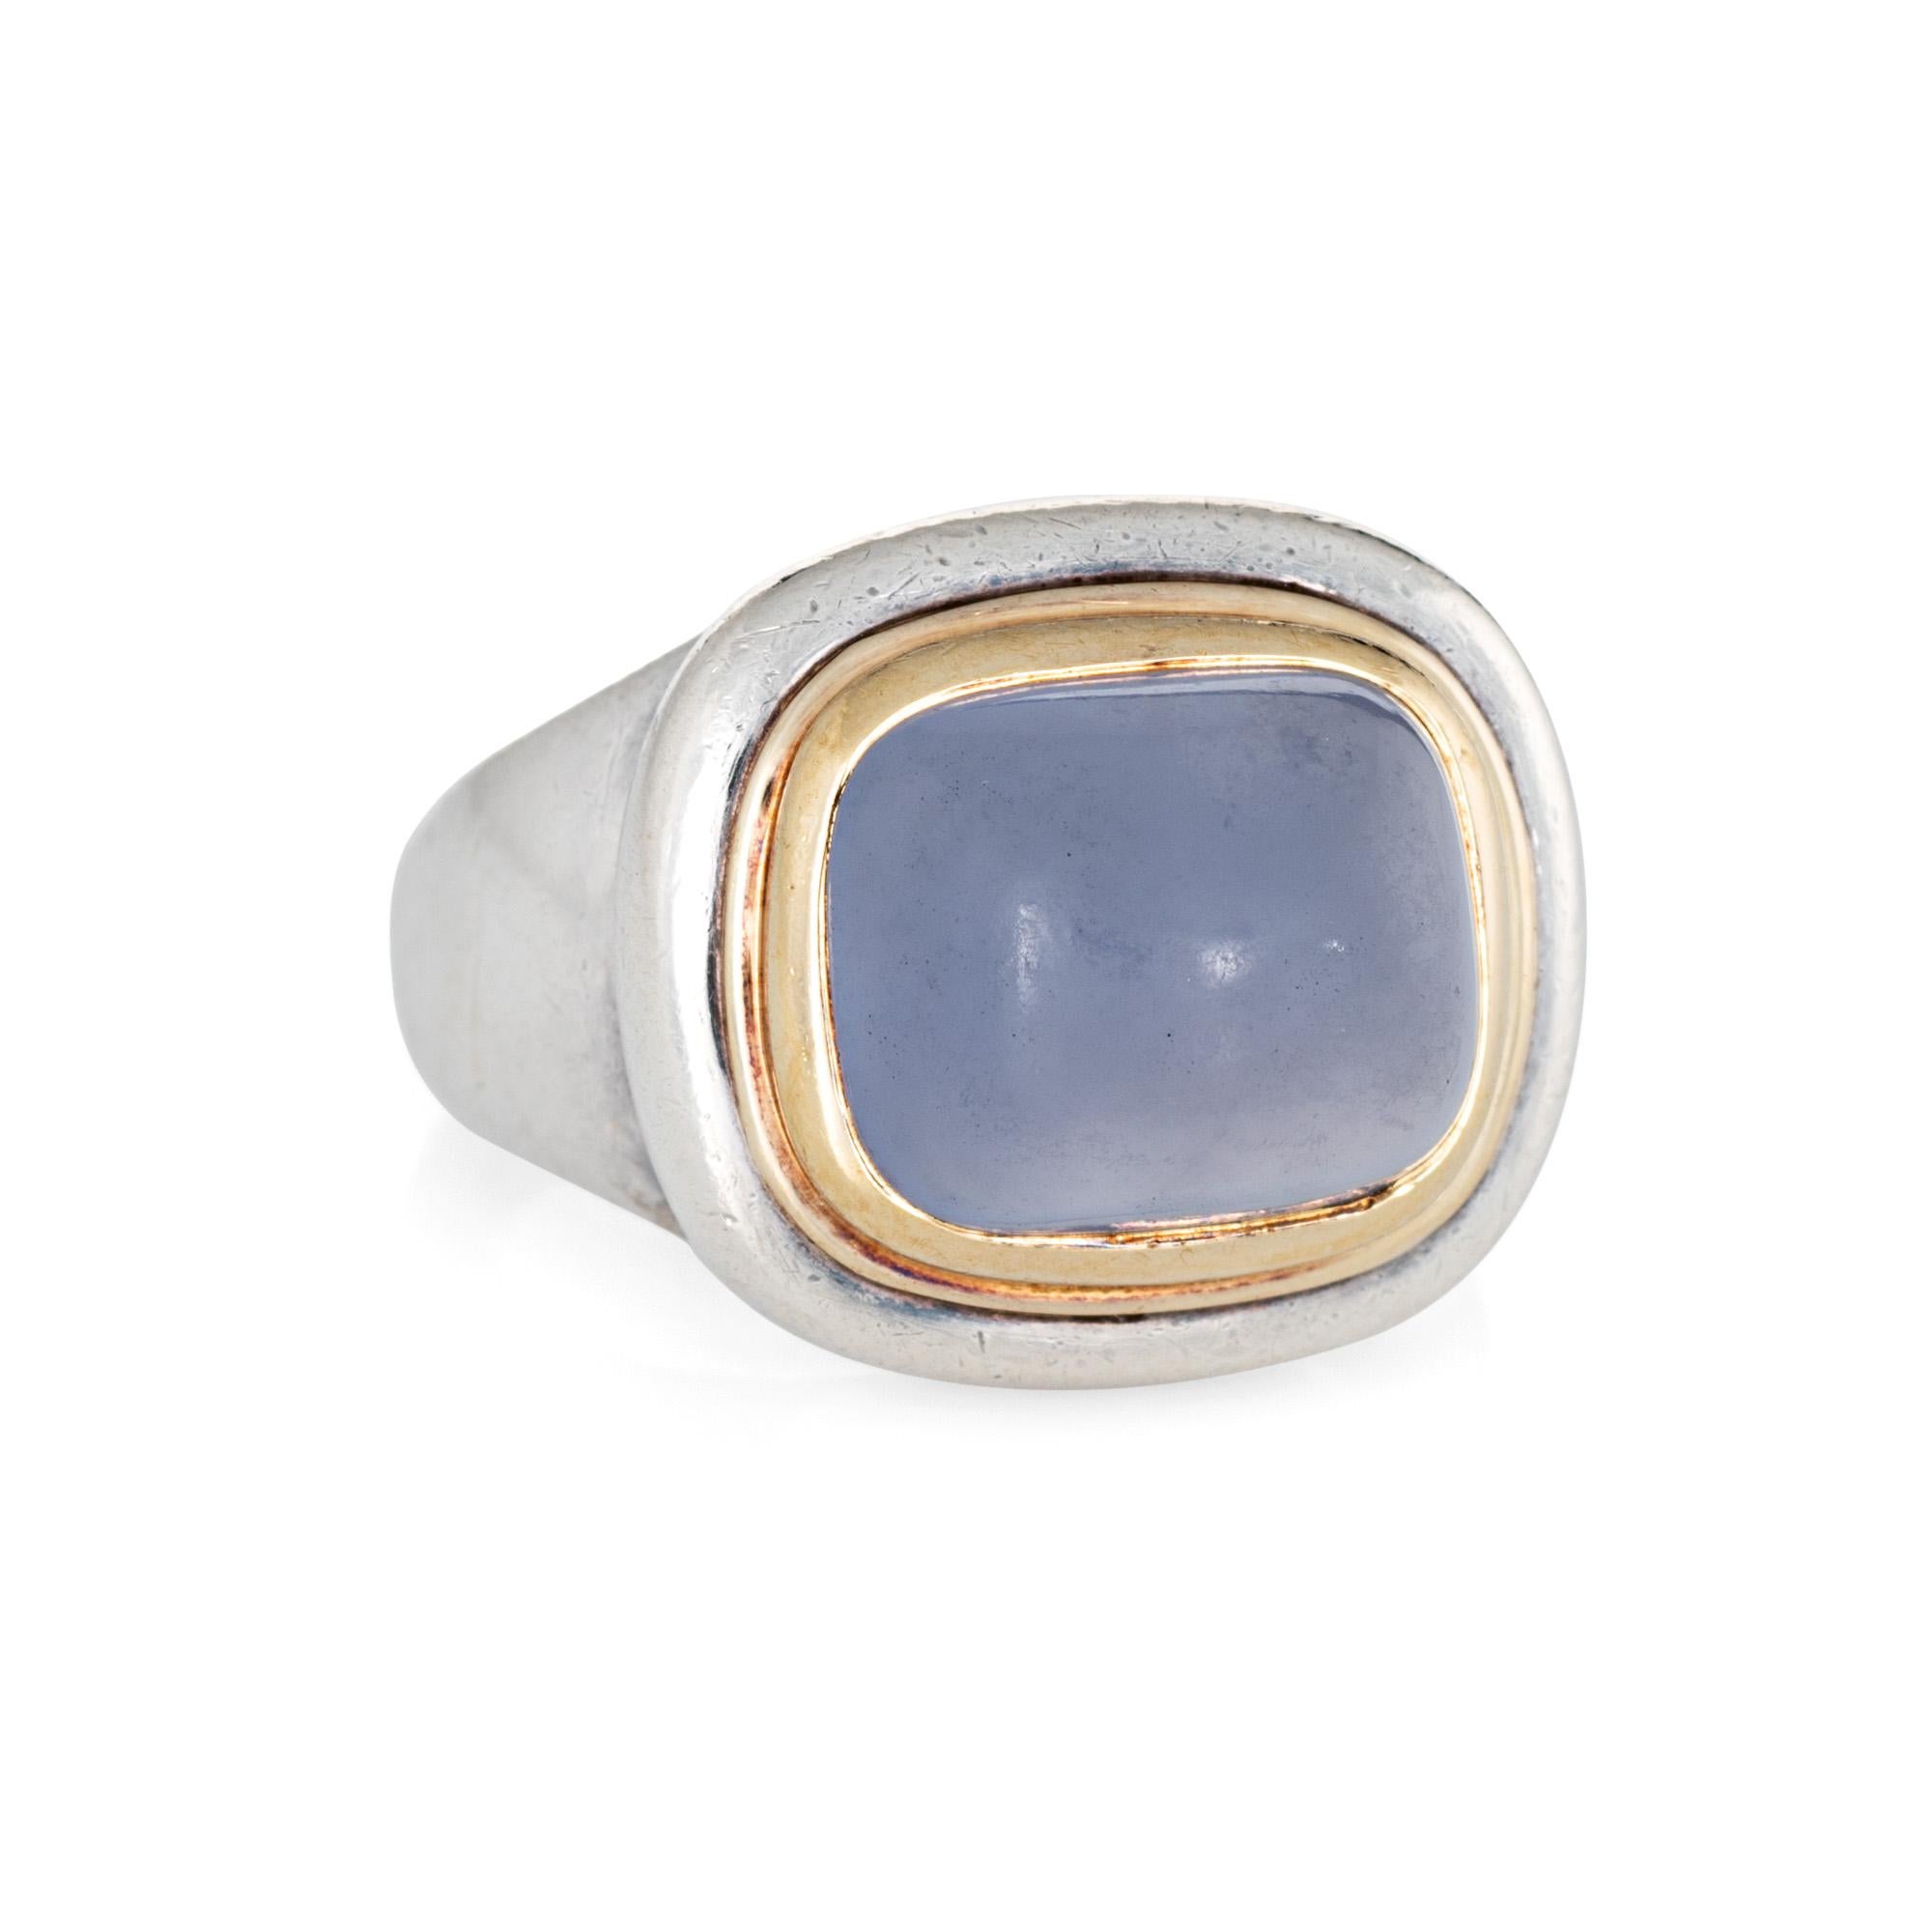 Finely detailed vintage Tiffany & Co blue chalcedony ring (circa 1990s) crafted in sterling silver & 18 karat yellow gold. 

Cabochon cut blue chalcedony 11mm x 9.5mm. The chalcedony is in very good condition and free of cracks or chips (some very